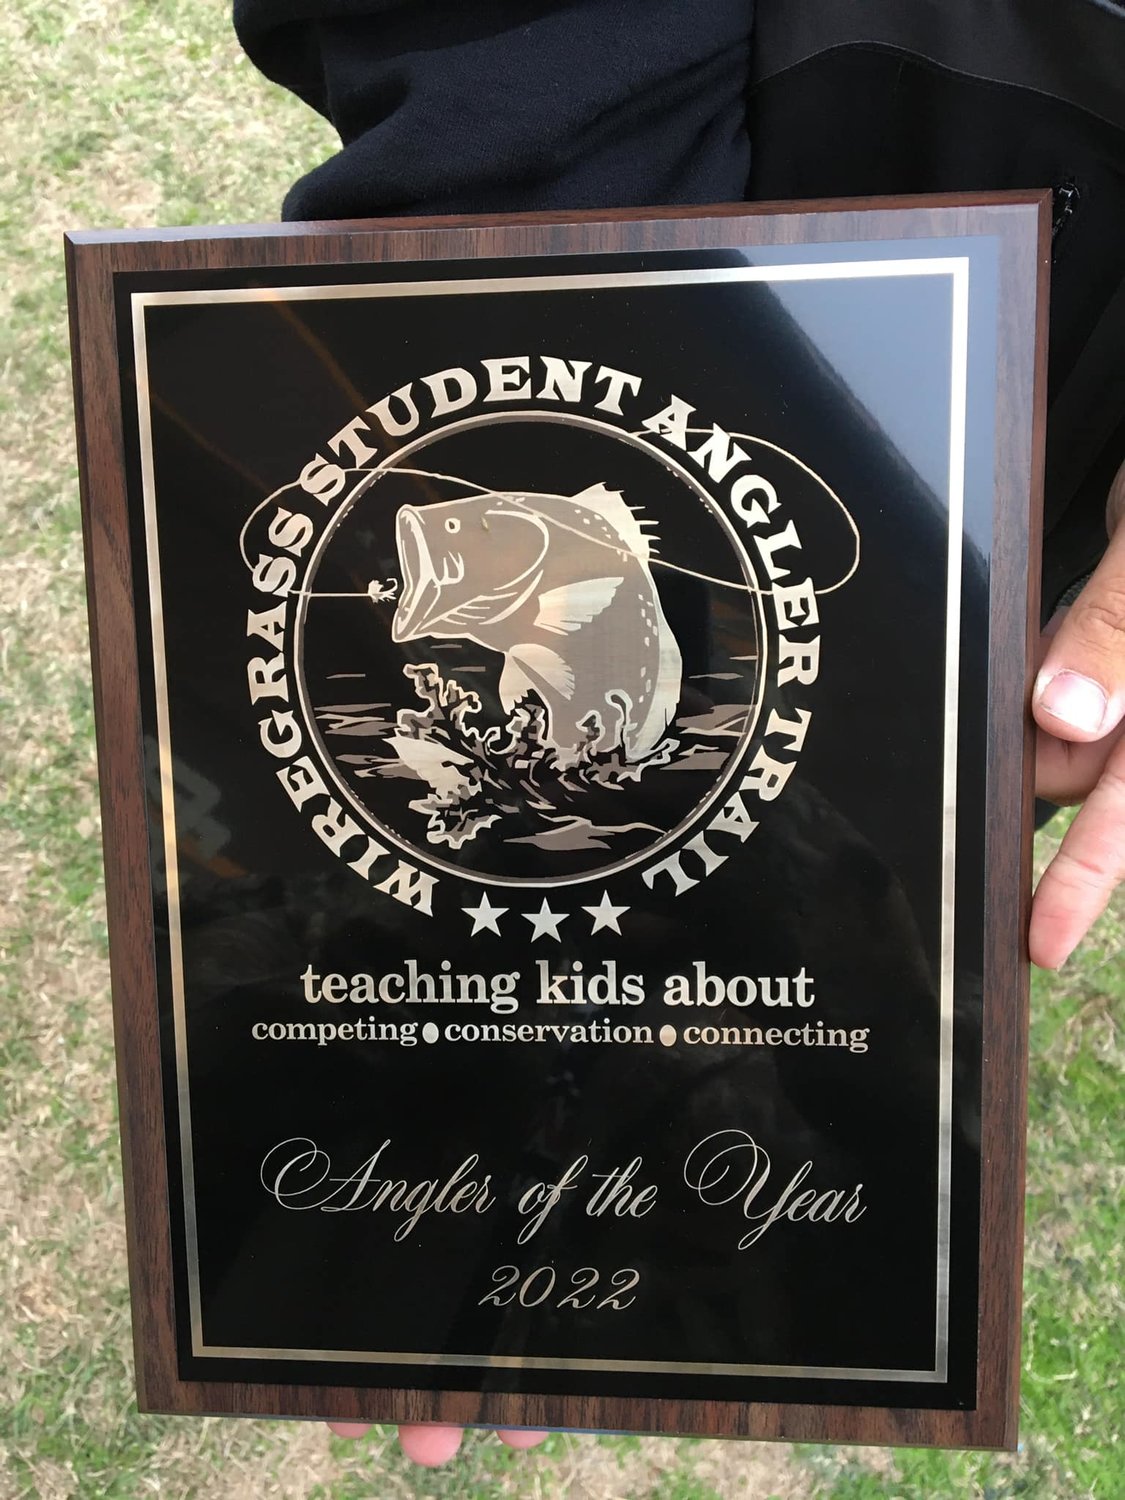 The Angler of the Year plaques that are coming back to Bay Minette after James Travis and Jameson Norris finished the Wiregrass Student Angler Trail in first place of the standings. The Baldwin County High School duo also represented the school at the Bassmaster National Championships last spring.